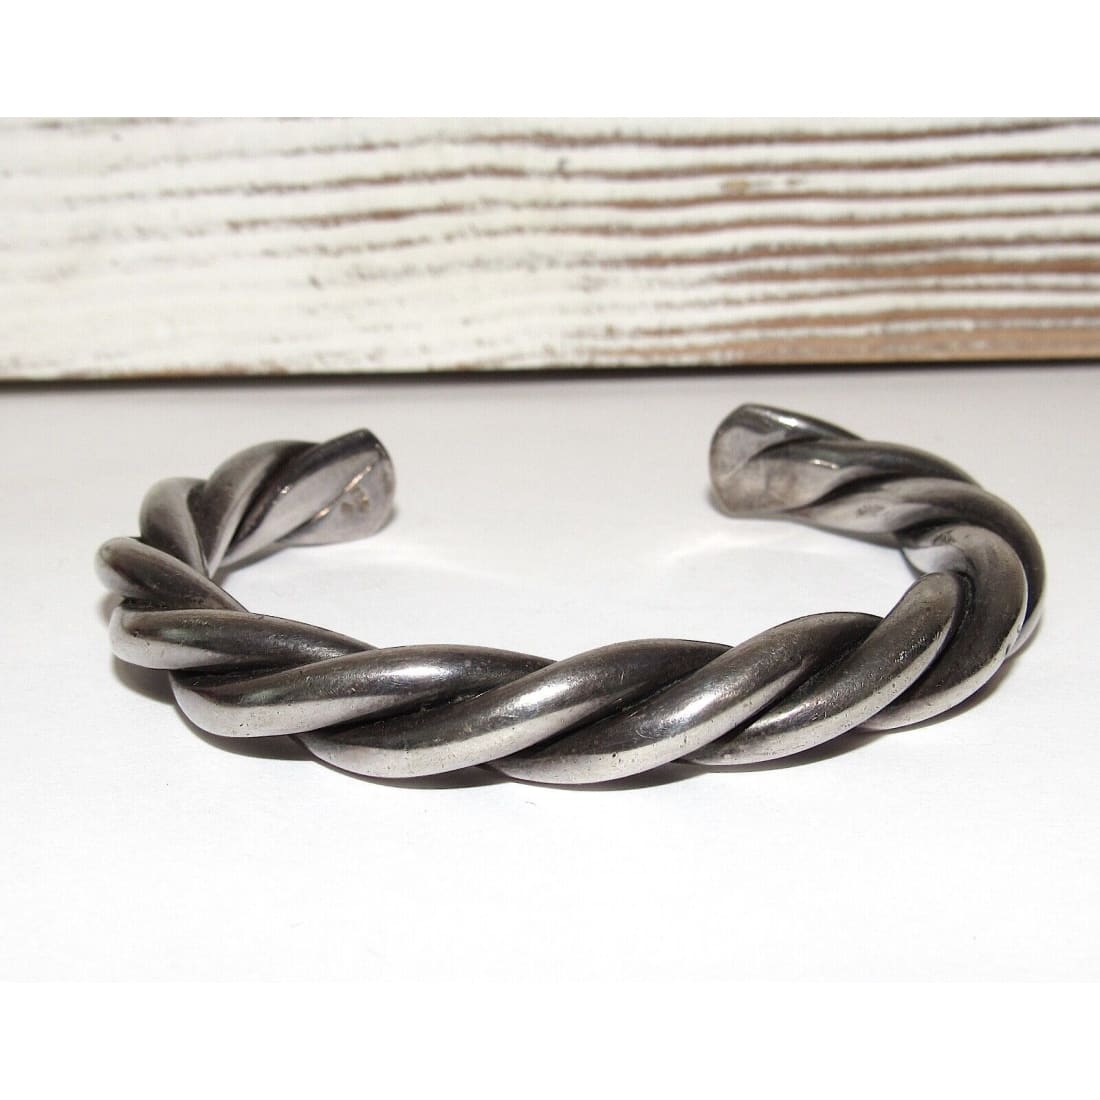 VTG Mexican Twisted Rope Sterling Silver 925 Bracelet Cuff 7